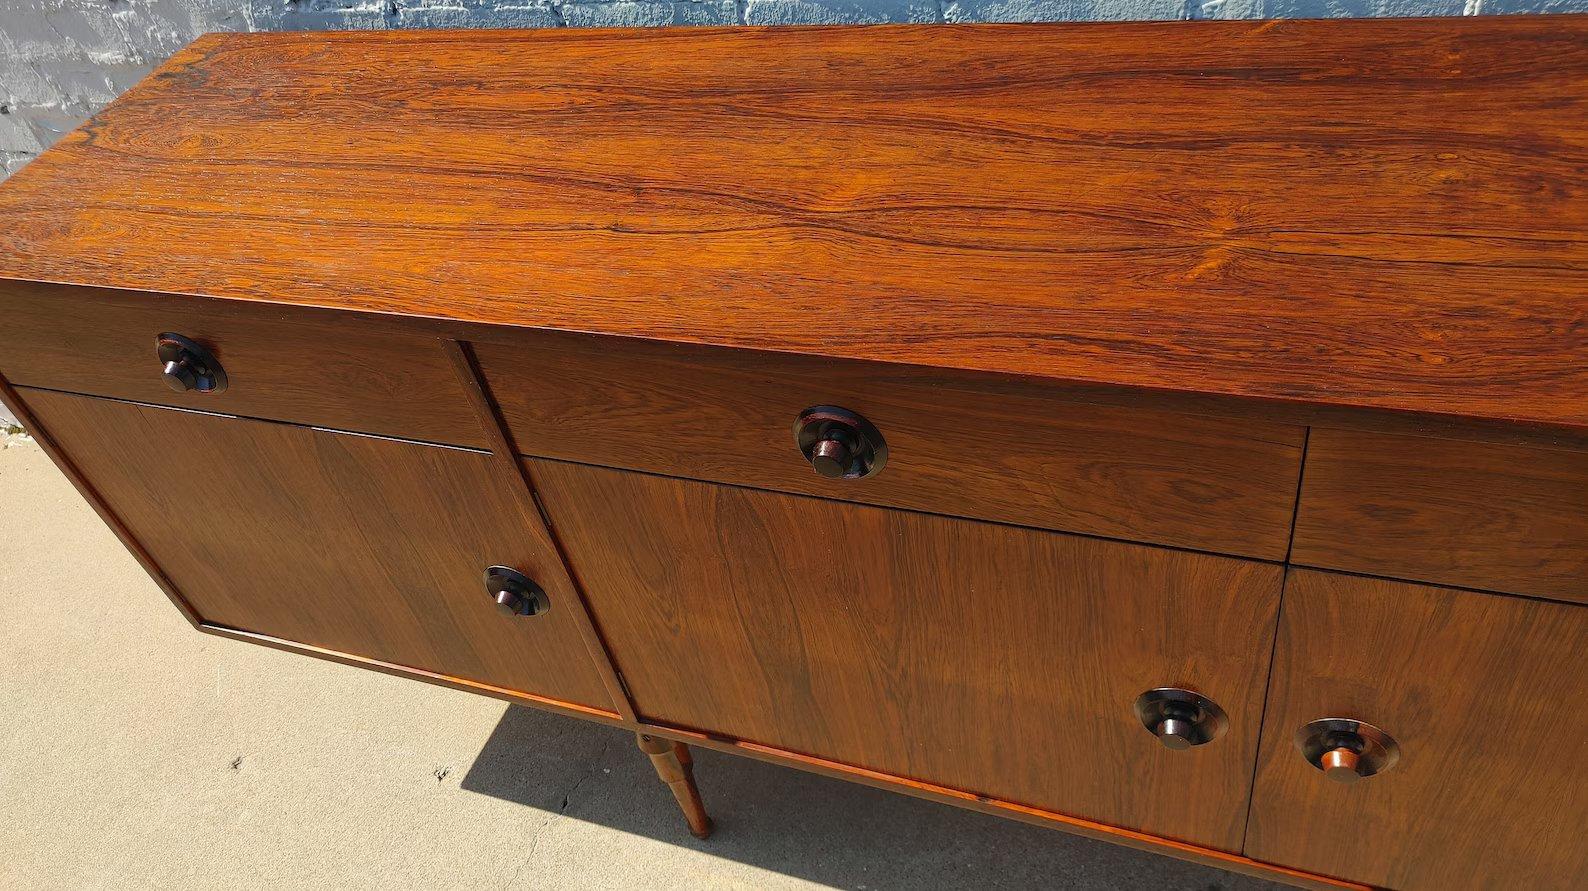 Mid Century Italian Modern Rosewood Sideboard
 
Above average vintage condition and structurally sound. Has some expected slight finish wear and scratching. Top has some discoloration rings. Front has a couple areas that look to be light sun fading.